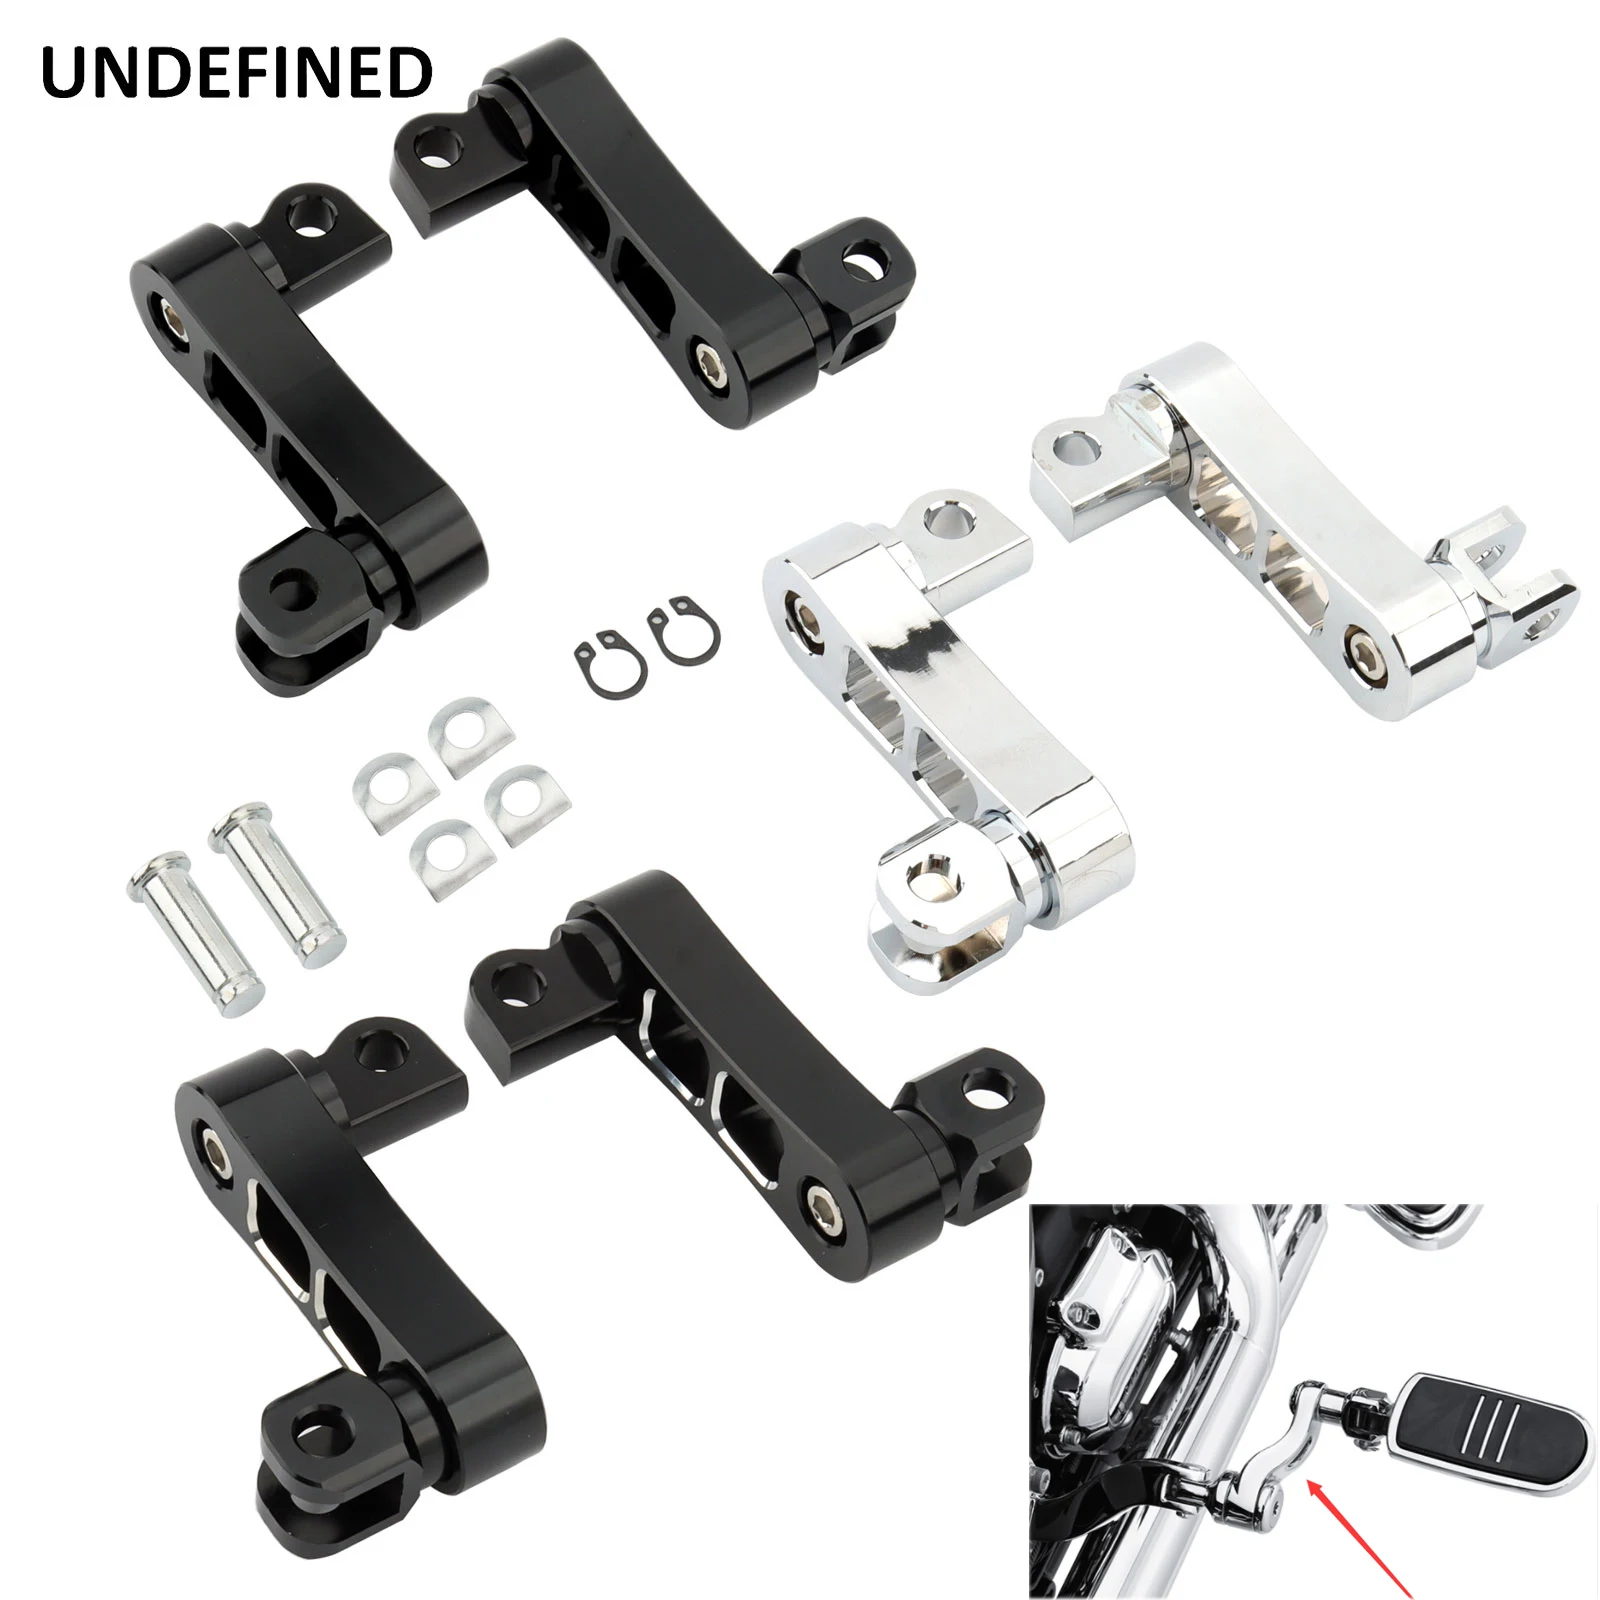 Motorcycle Adjustable Passenger Footpegs Mount Kit Highway Pegs Male Mount Foot Peg Clamp Support Extensions Bracket For Harley